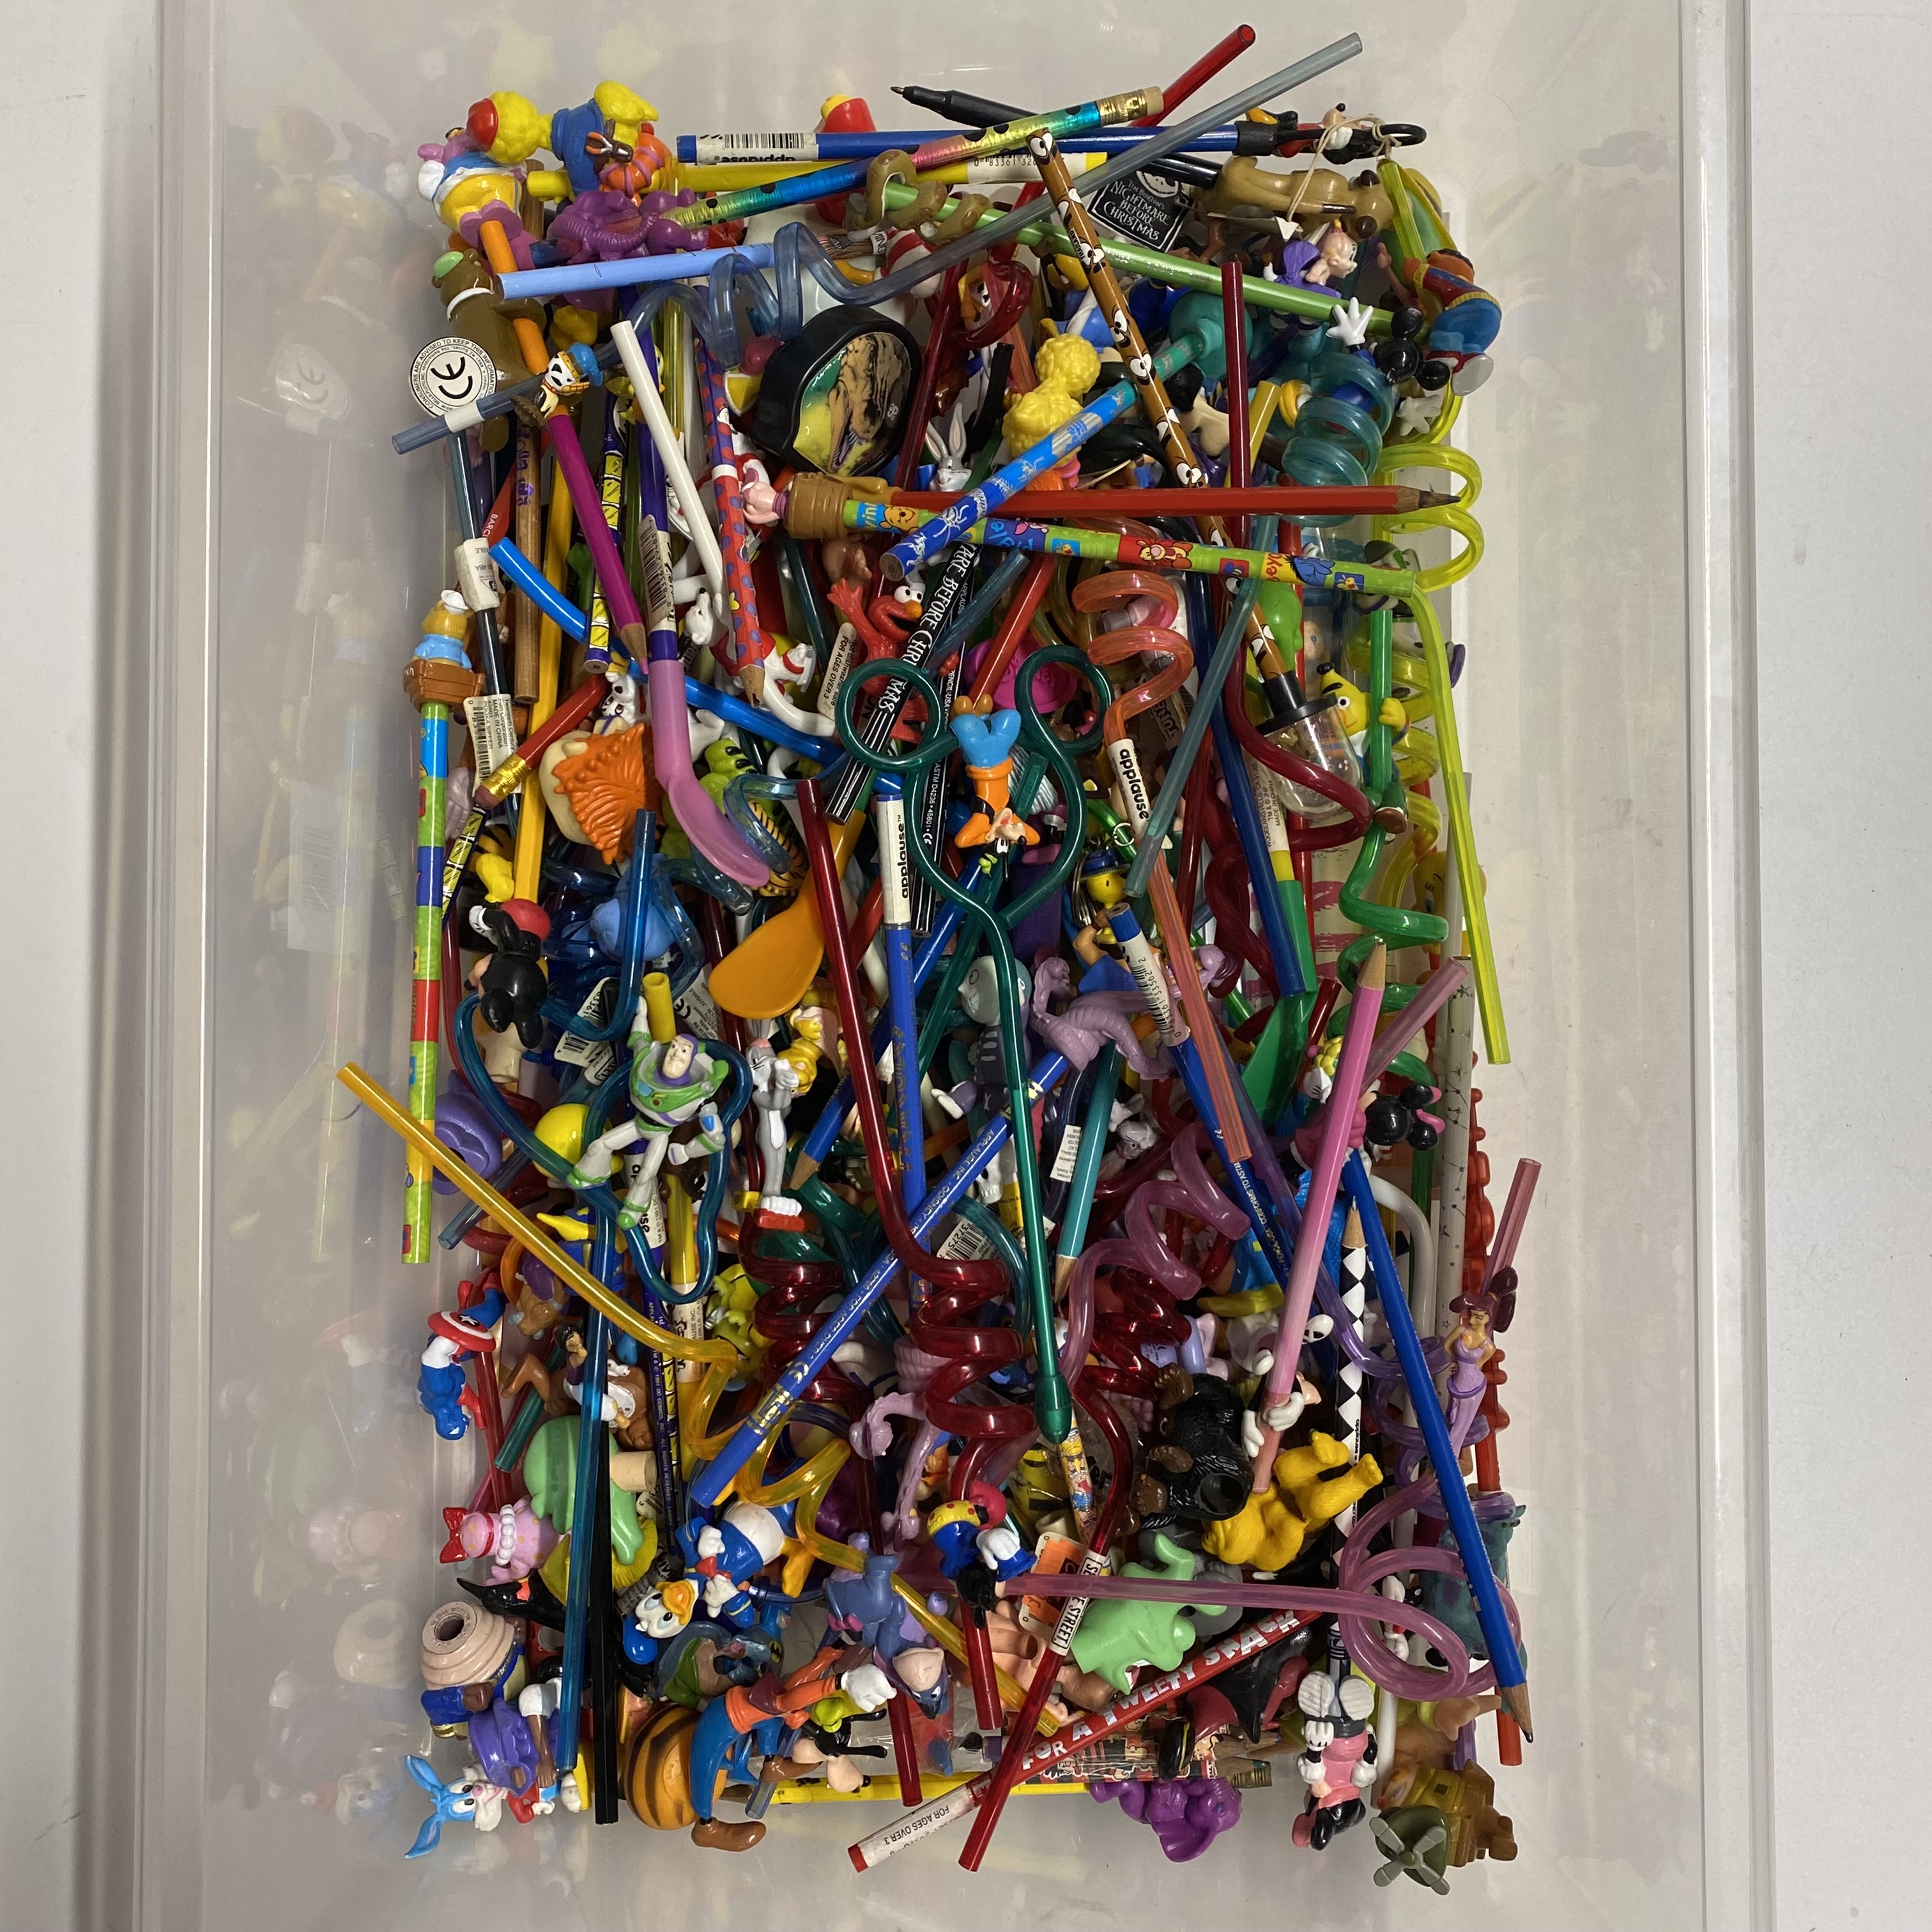 A collection of mostly Disney pencils including tops and novelty straws.